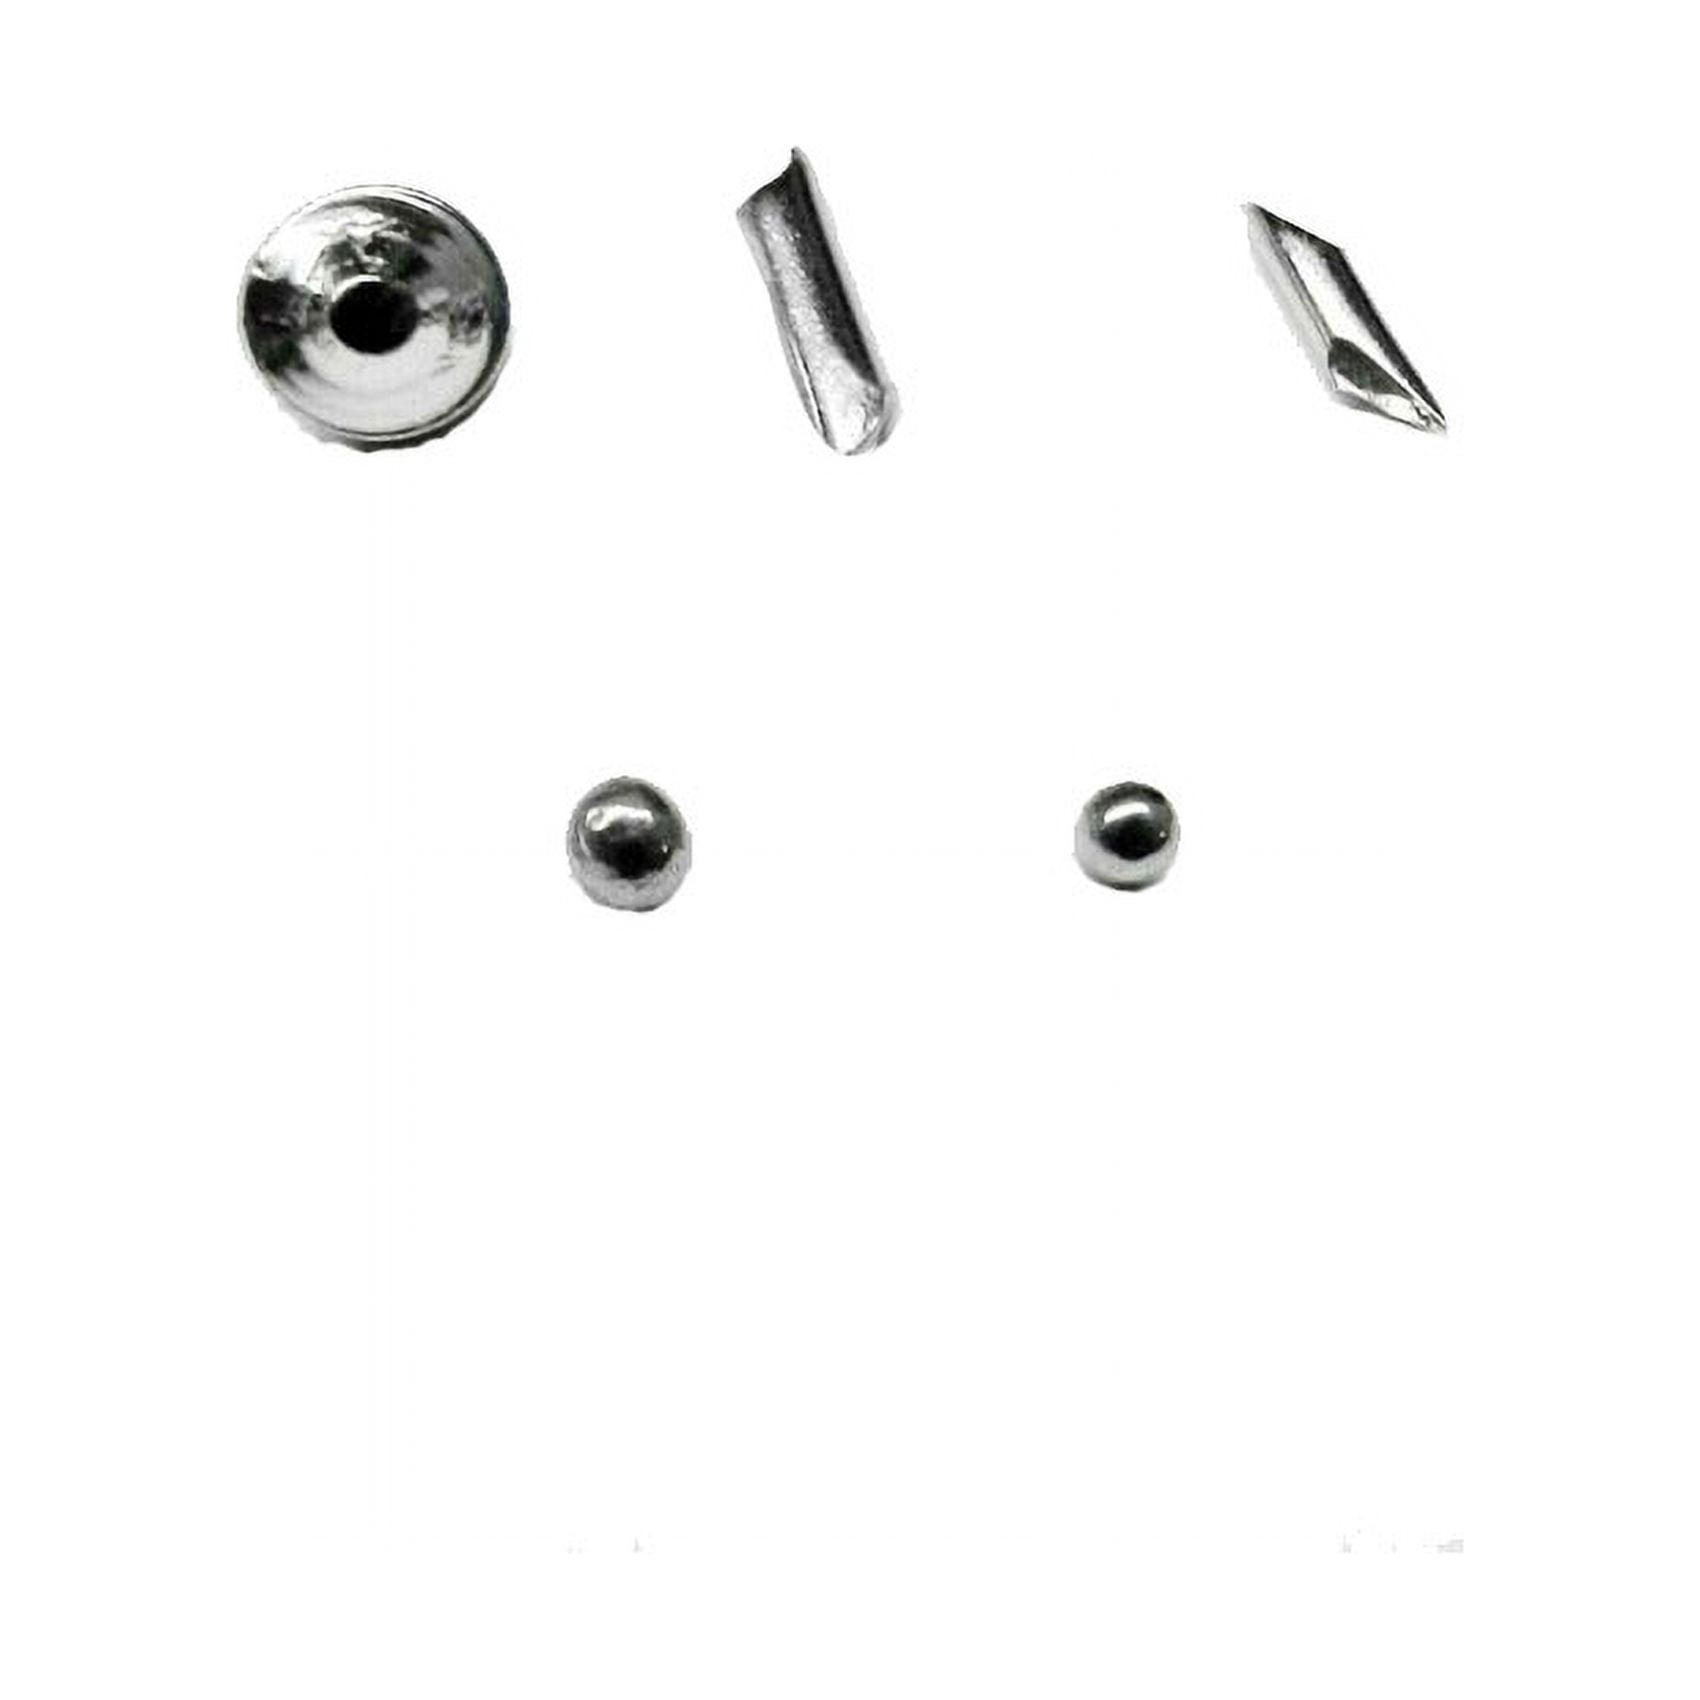 Stainless Steel Shot (304) for Tumbling, No Pins, 2 Pound Bag